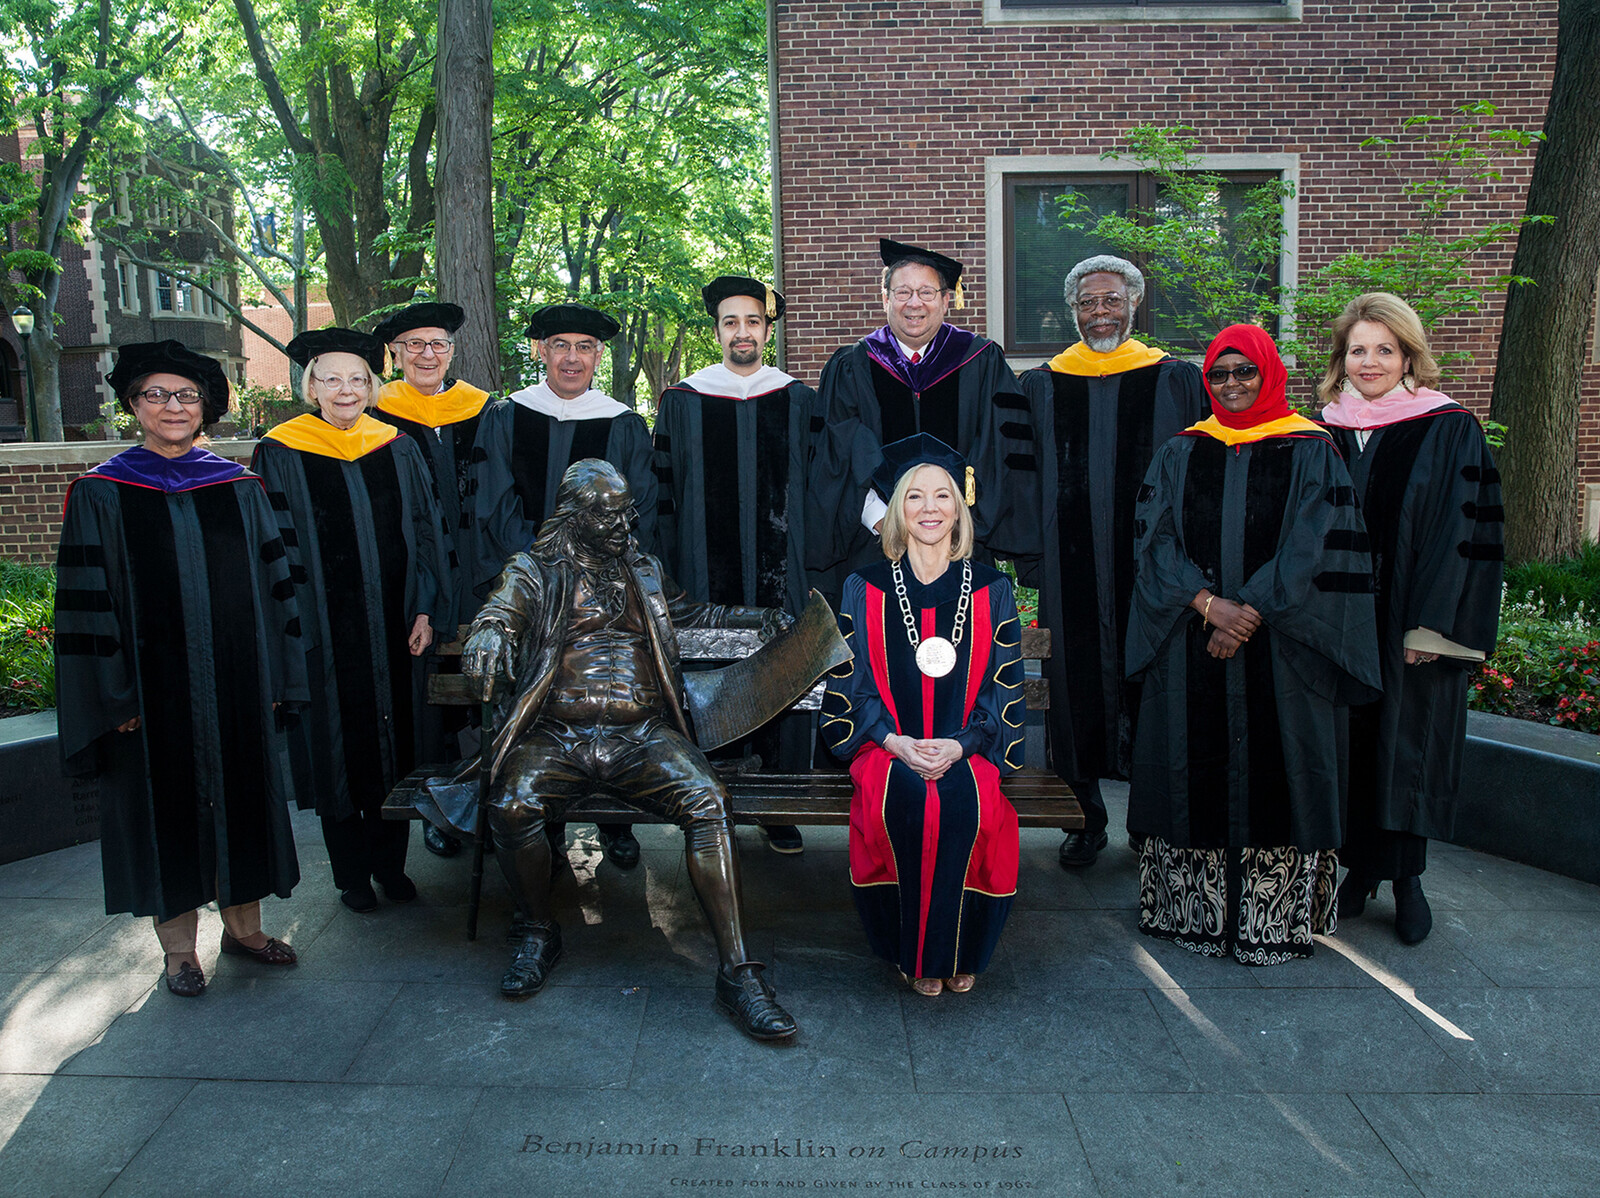 2016 Penn, Amy Gutmann and honorary degree recipients in regalia